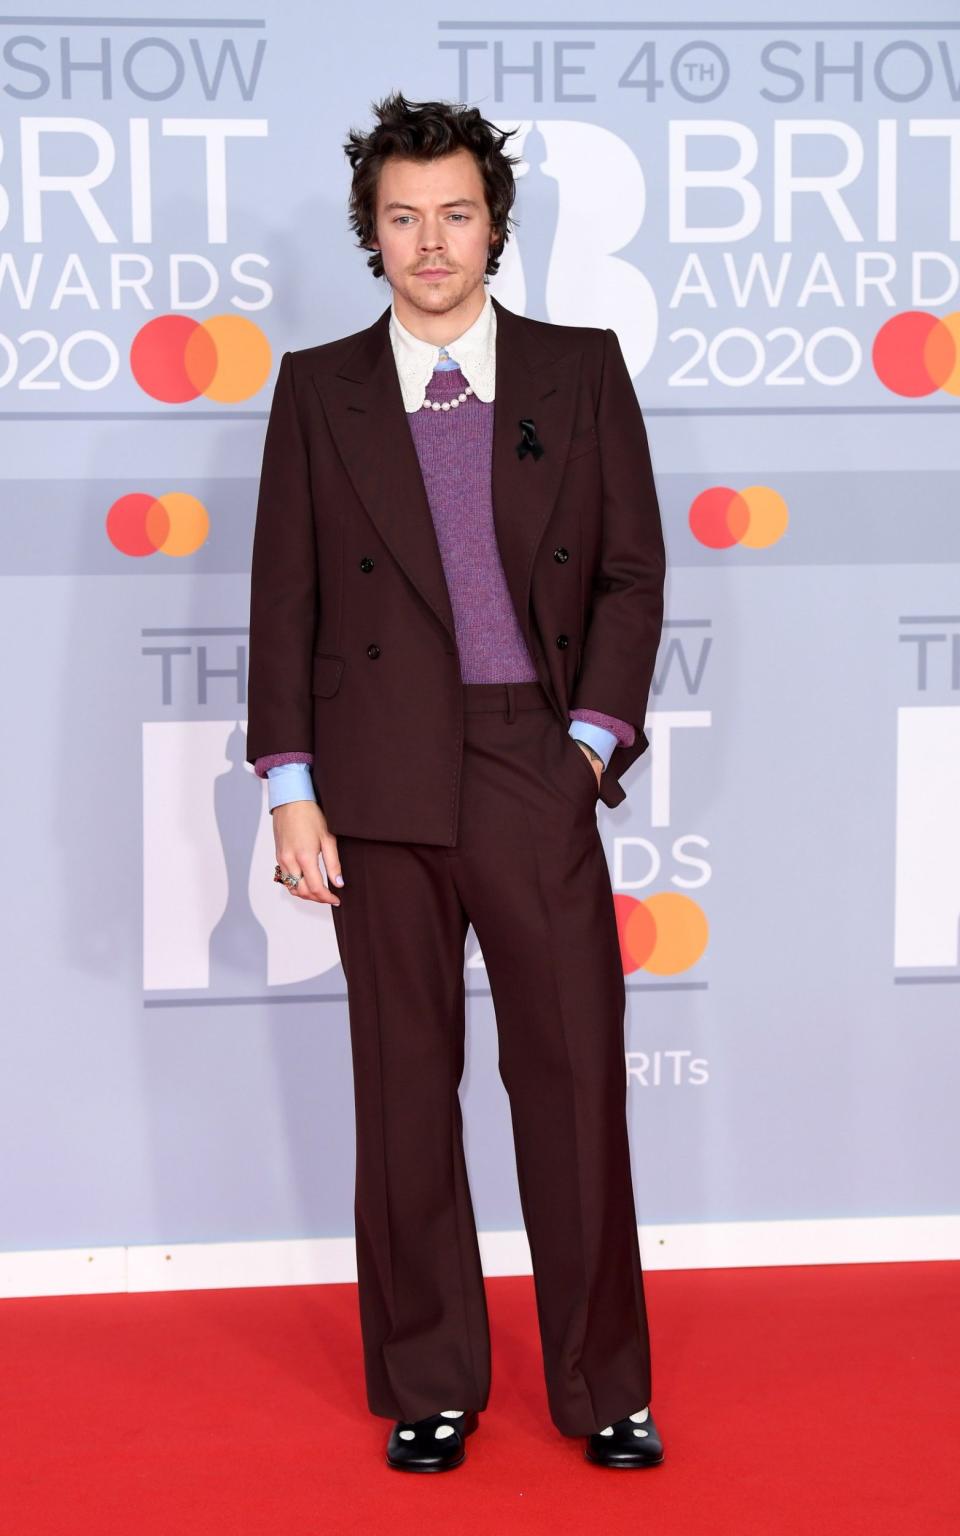 Harry Styles attends the 2020 Brit Awards